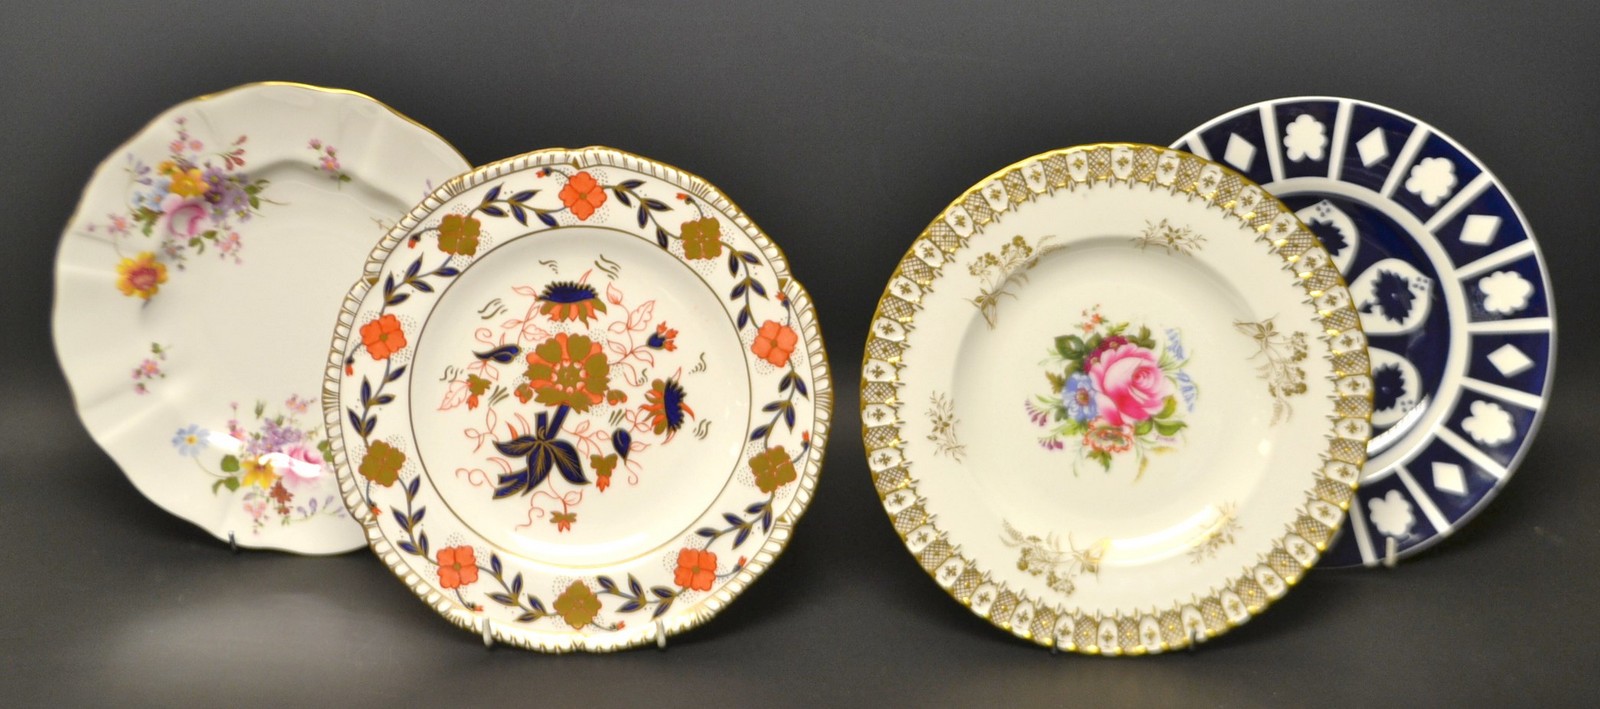 A Royal Crown Derby Heraldic border Posies 27cm plate, painted by F.